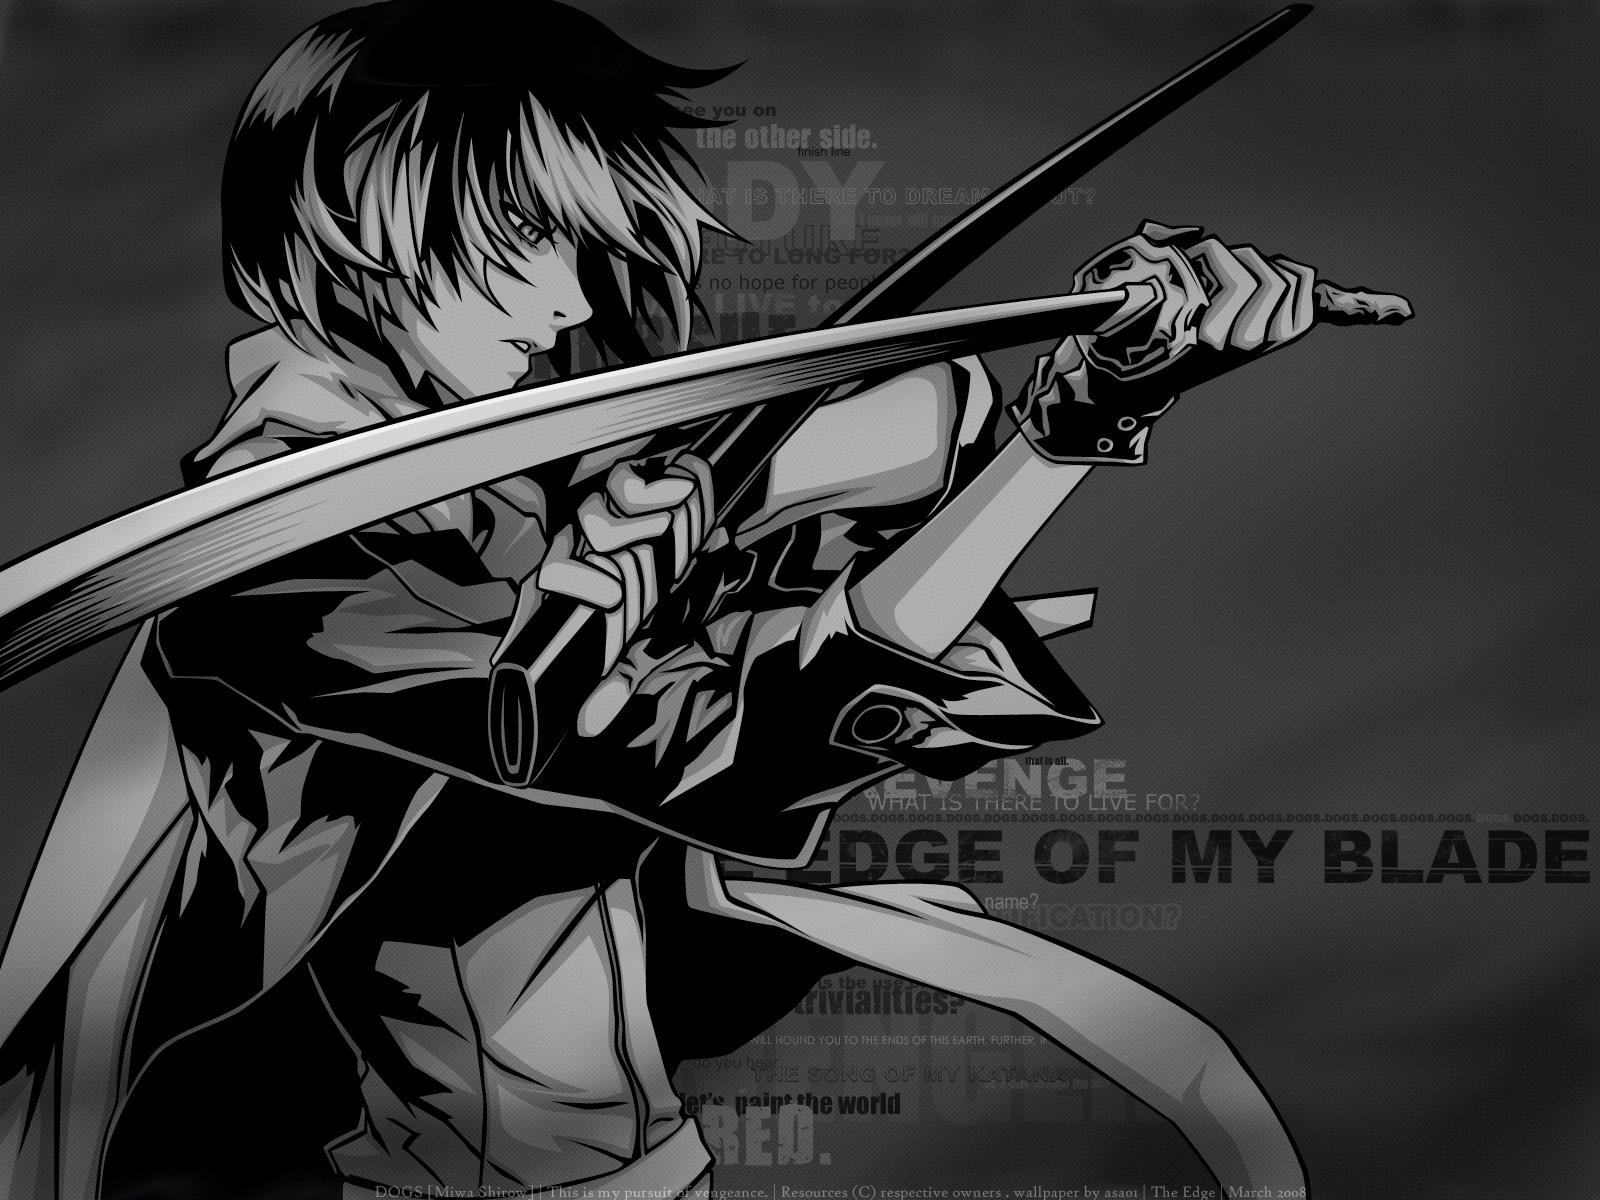 Download Grayscale Brooding Anime Cool Boy Wallpaper | Wallpapers.com